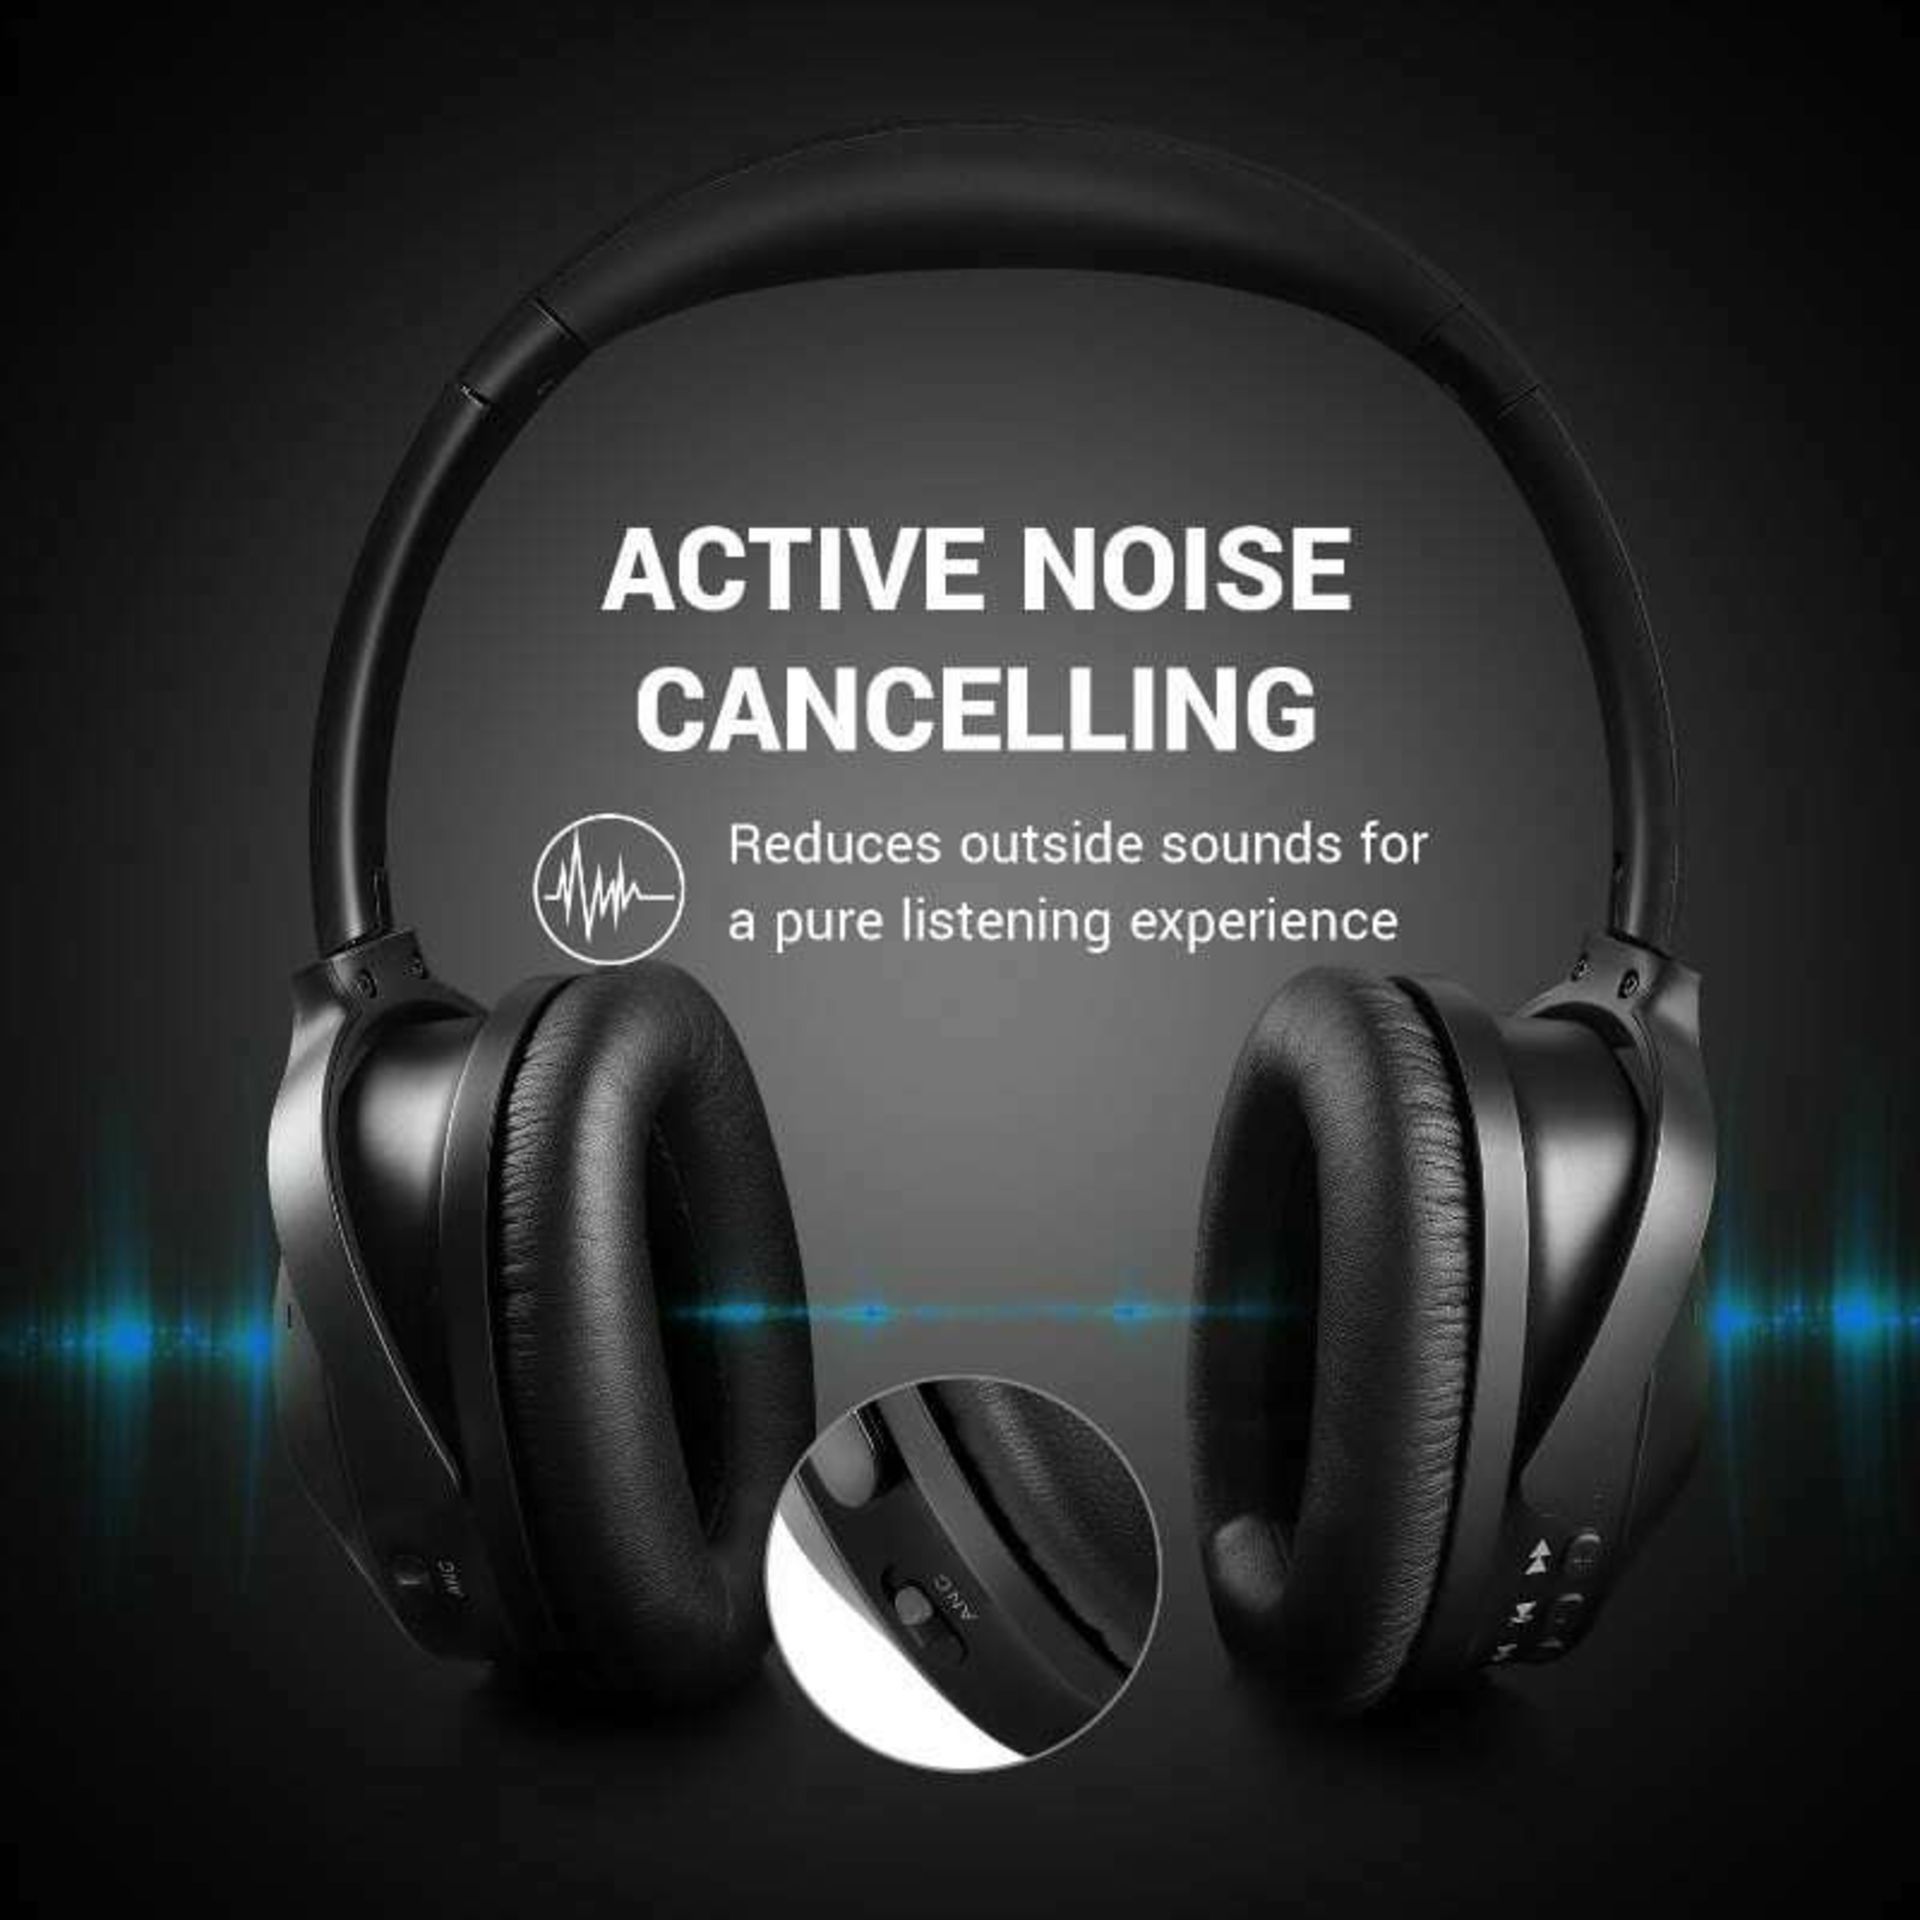 Oneaudio A9 Traveller ANC Bluetooth Headphones - Image 9 of 9